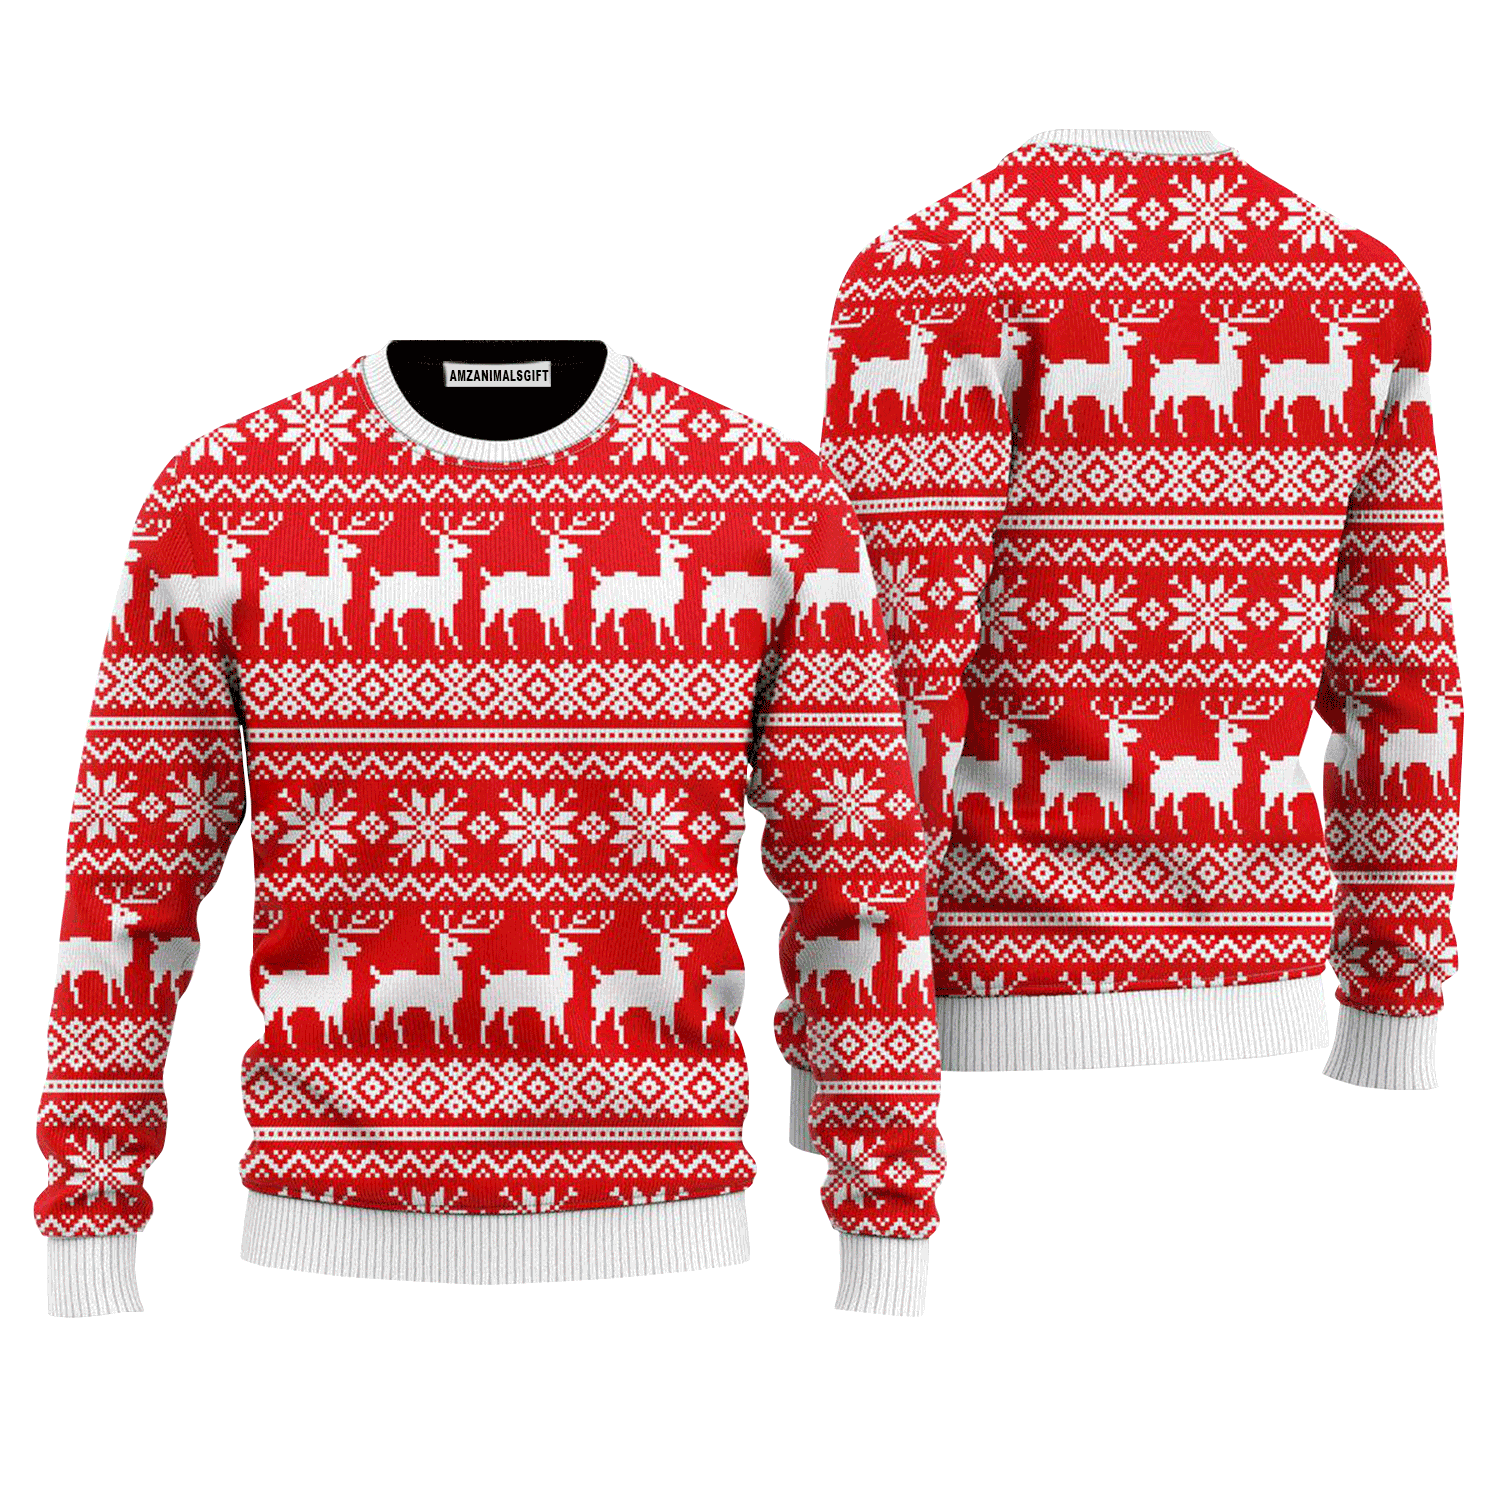 Reindeer Sweater Christmas Is Lit, Ugly Sweater For Men & Women, Perfect Outfit For Christmas New Year Autumn Winter